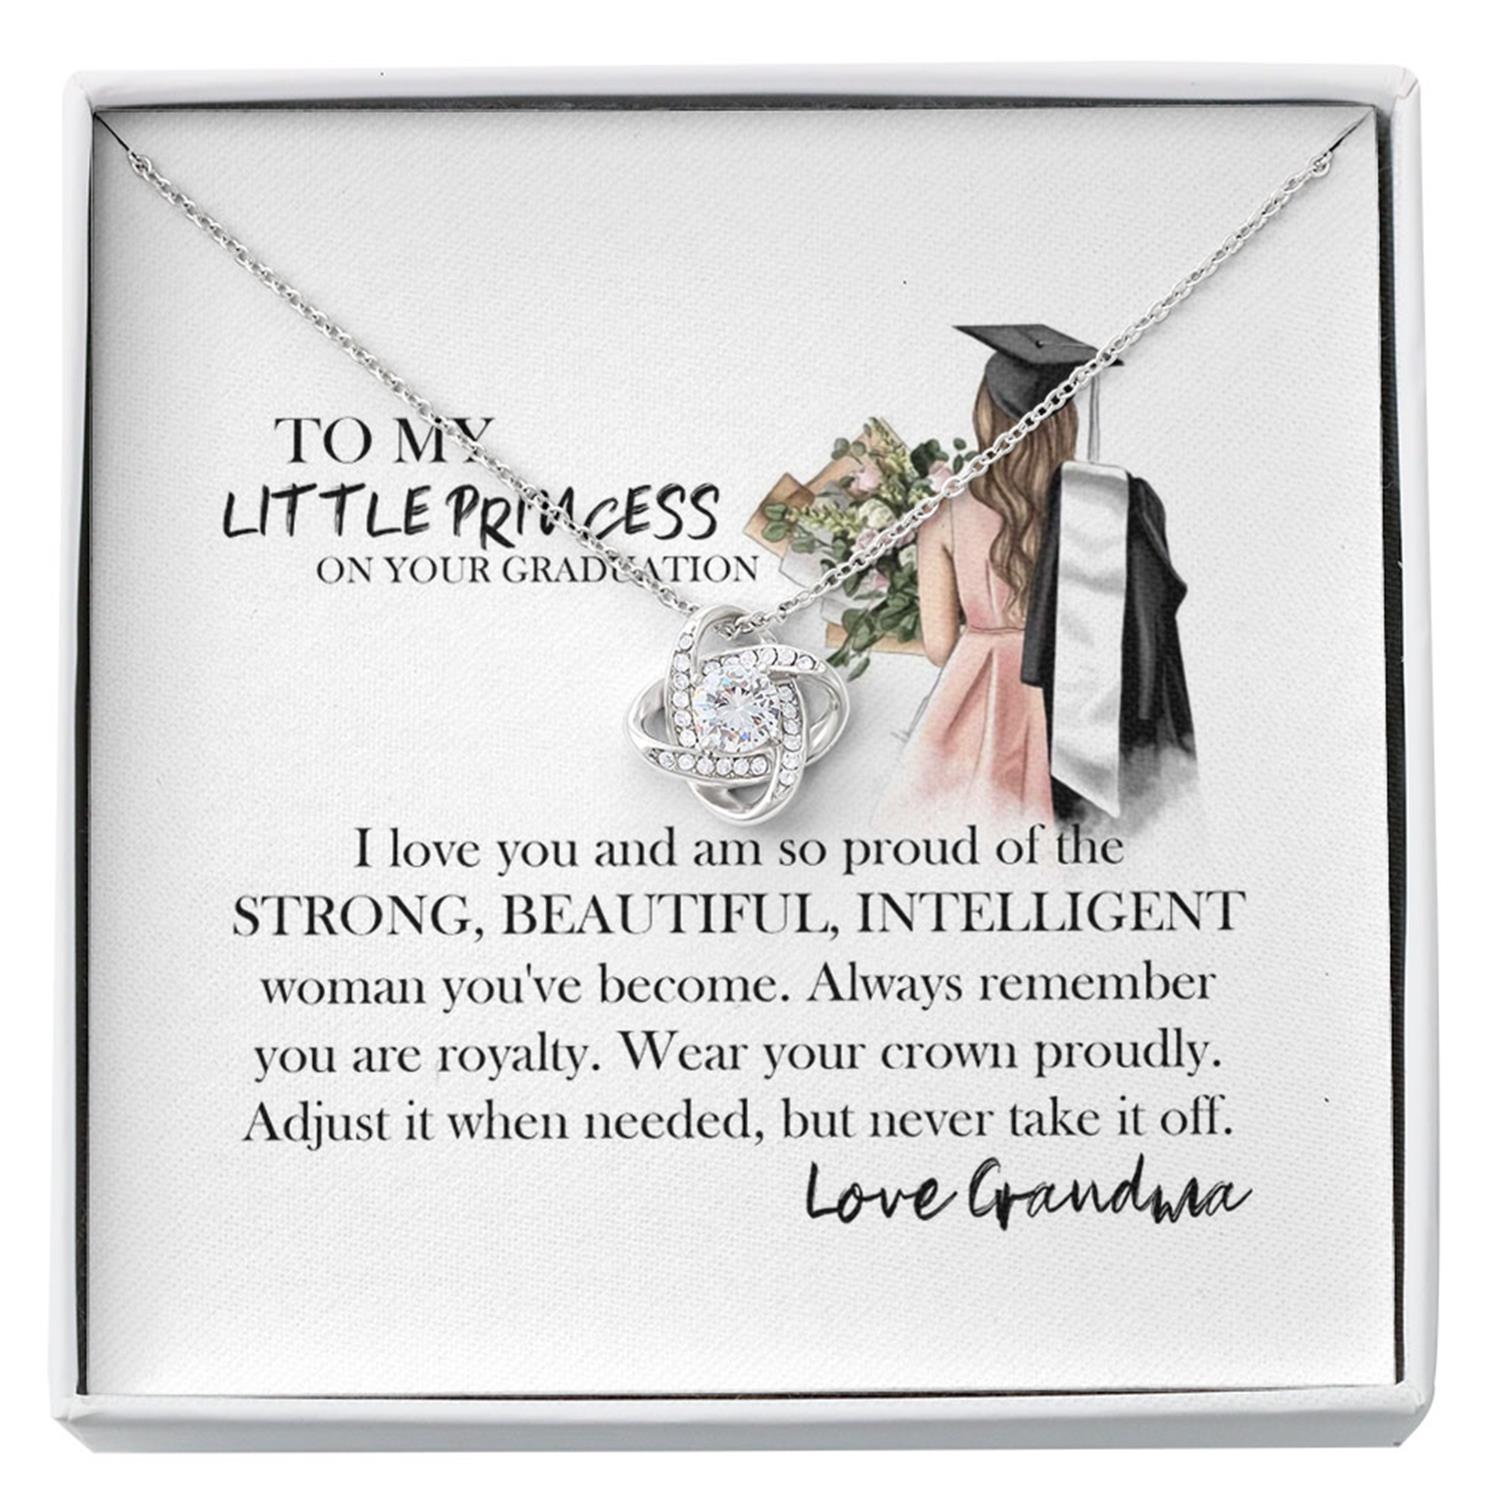 Granddaughter Necklace, Graduation Necklace For Granddaughter From Grandparents Custom Necklace